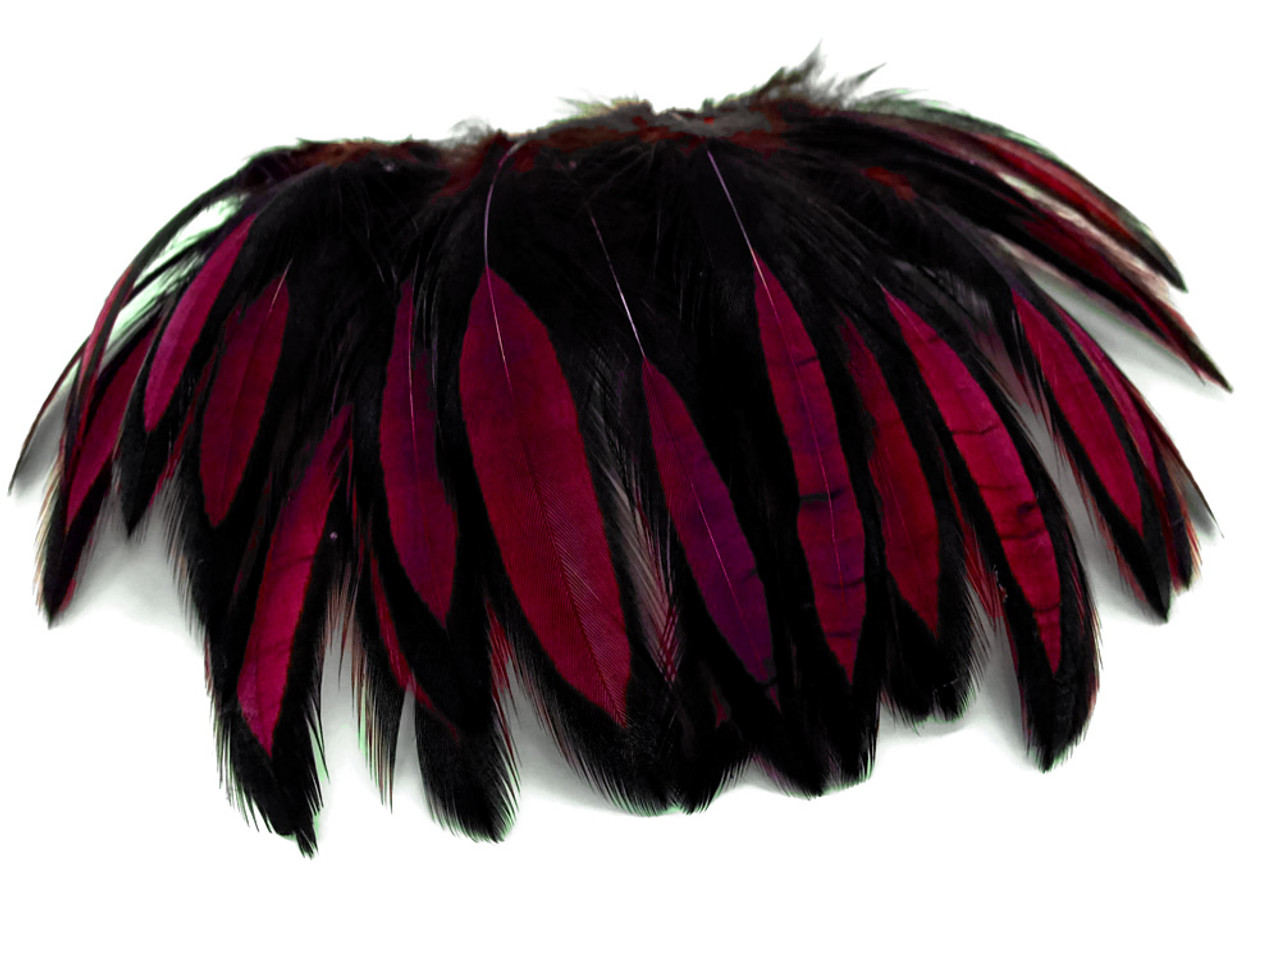 Small Violet Purple Craft Feathers Laced Rooster Cape Feathers for